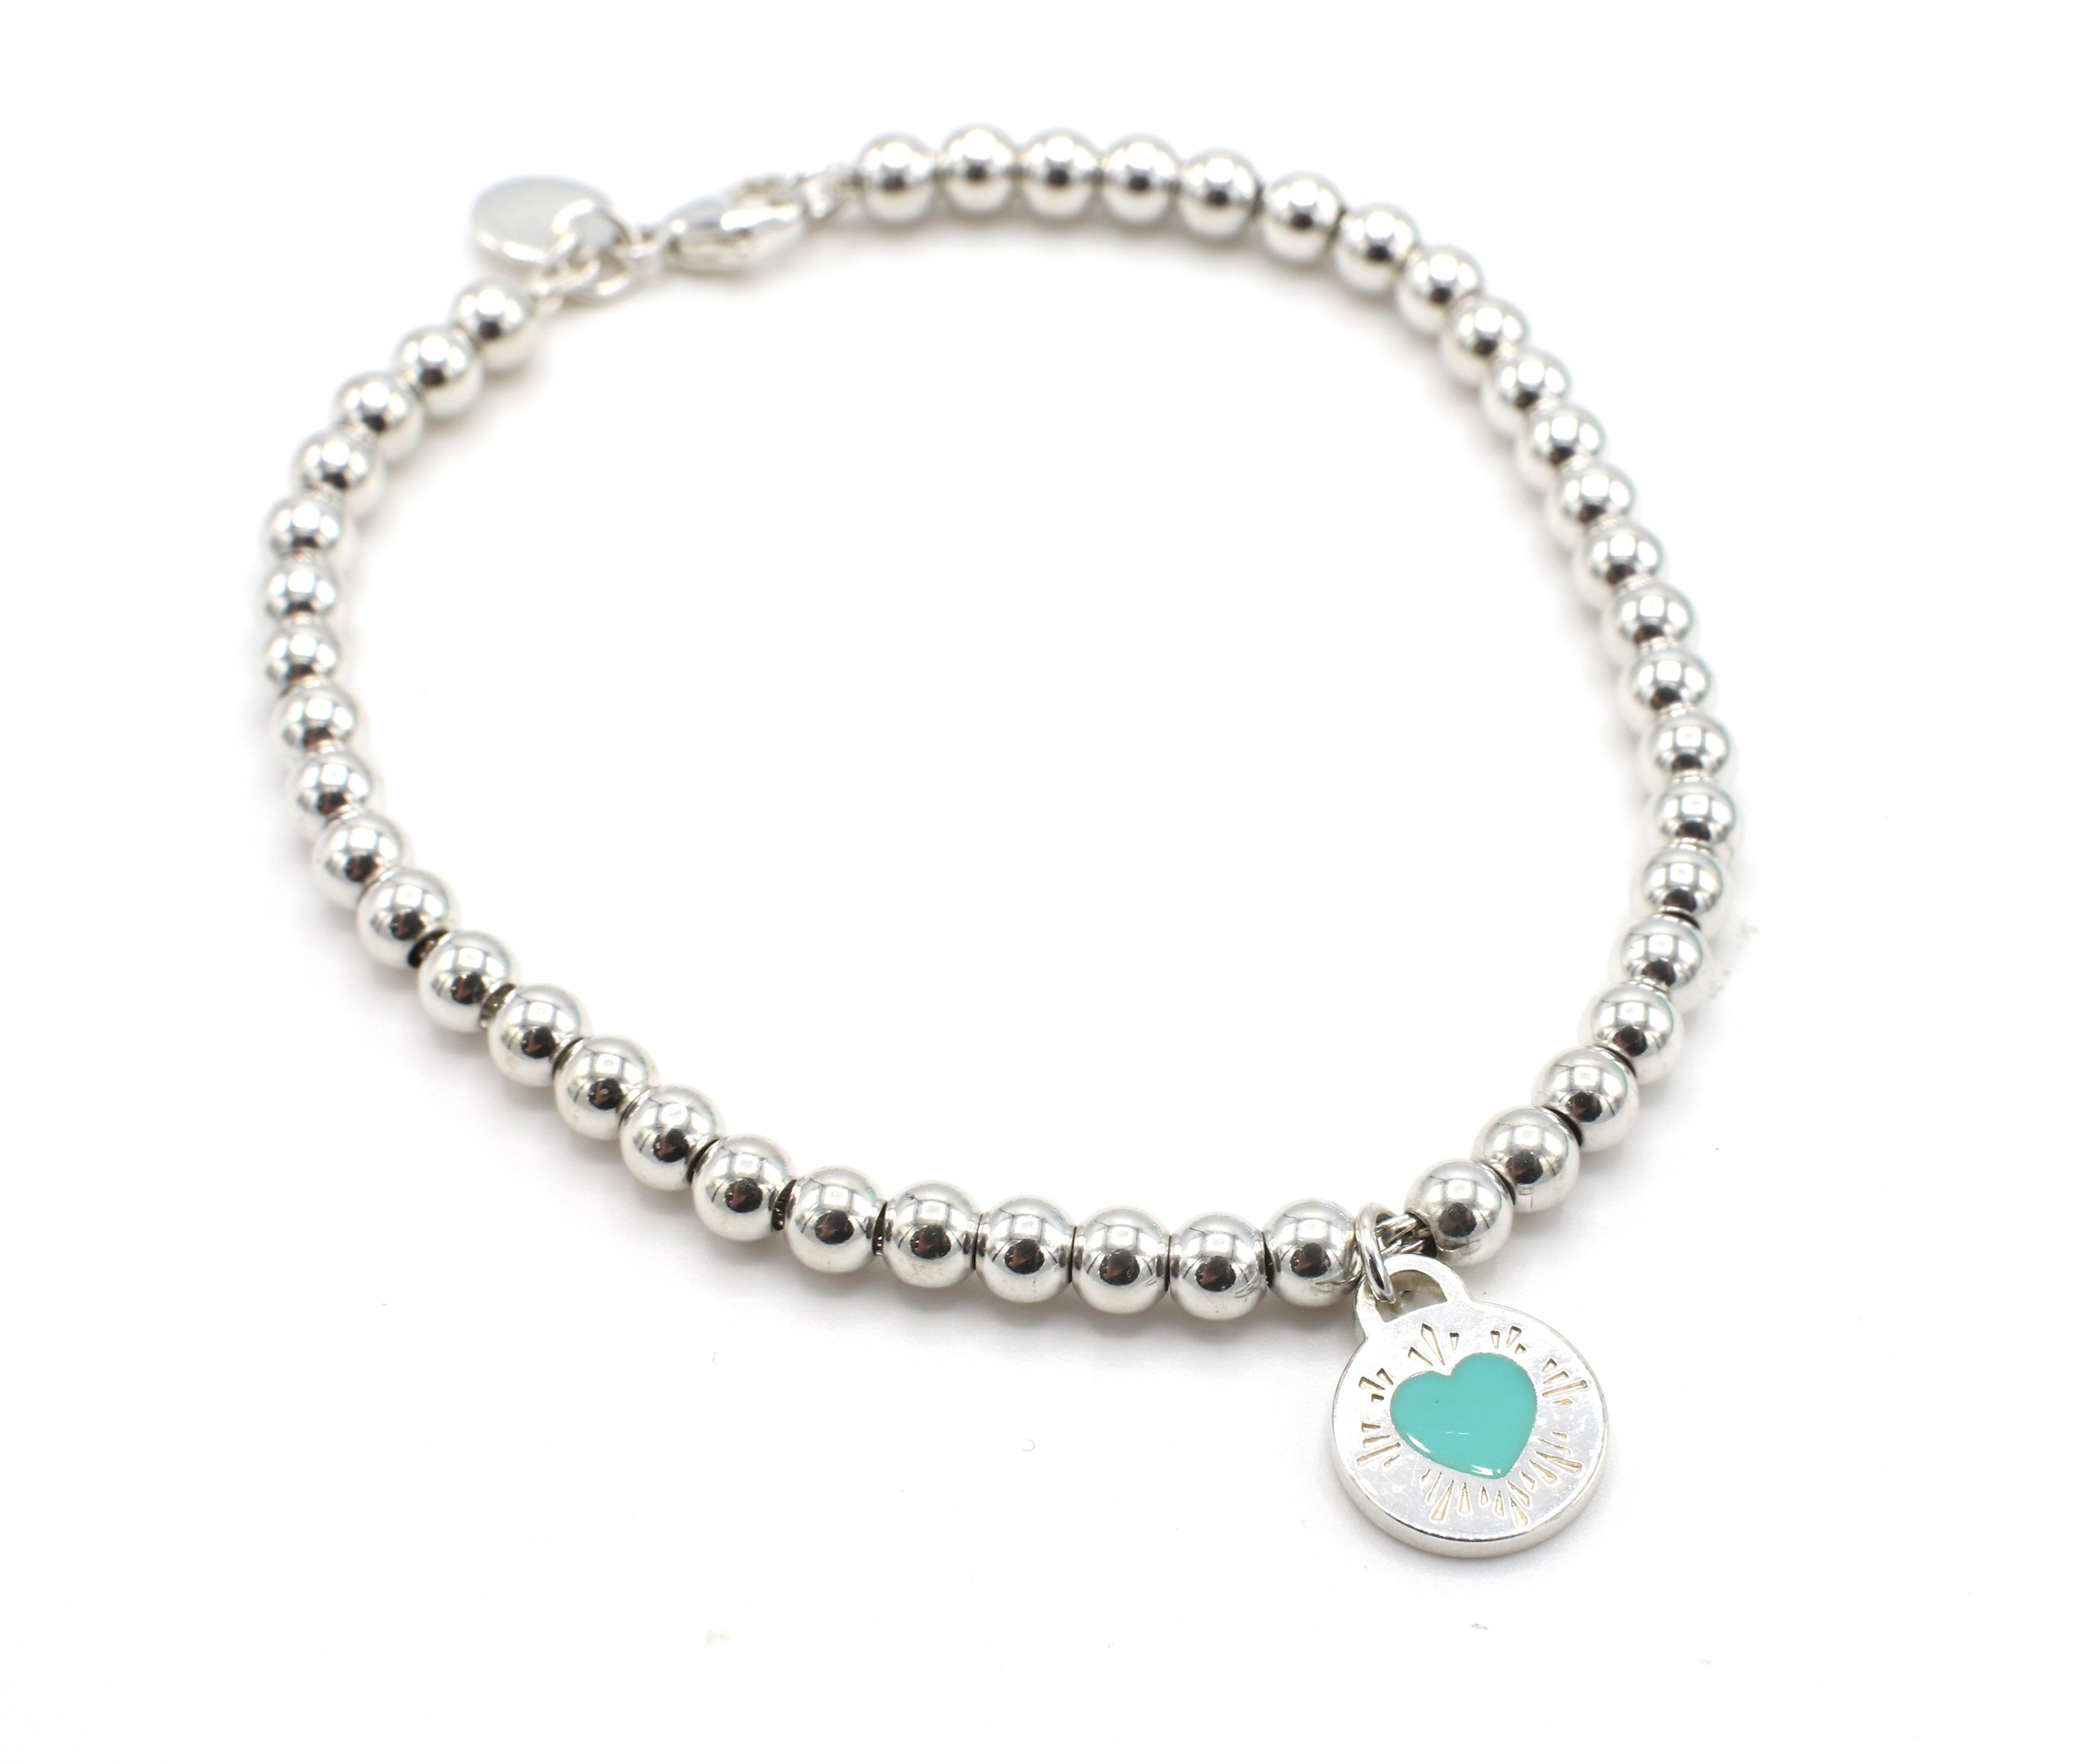 Tiffany & Co. Silver Return to Tiffany Blue Enamel Disc Heart Charm Bracelet 
Metal: Sterling Silver 925
Weight: 6.58 grams
Length: 7 inches
Width: 4mm
Signed: Please Return to Tiffany & Co. New York 925 AG 925 Tiffany & Co.
Charm: 10mm